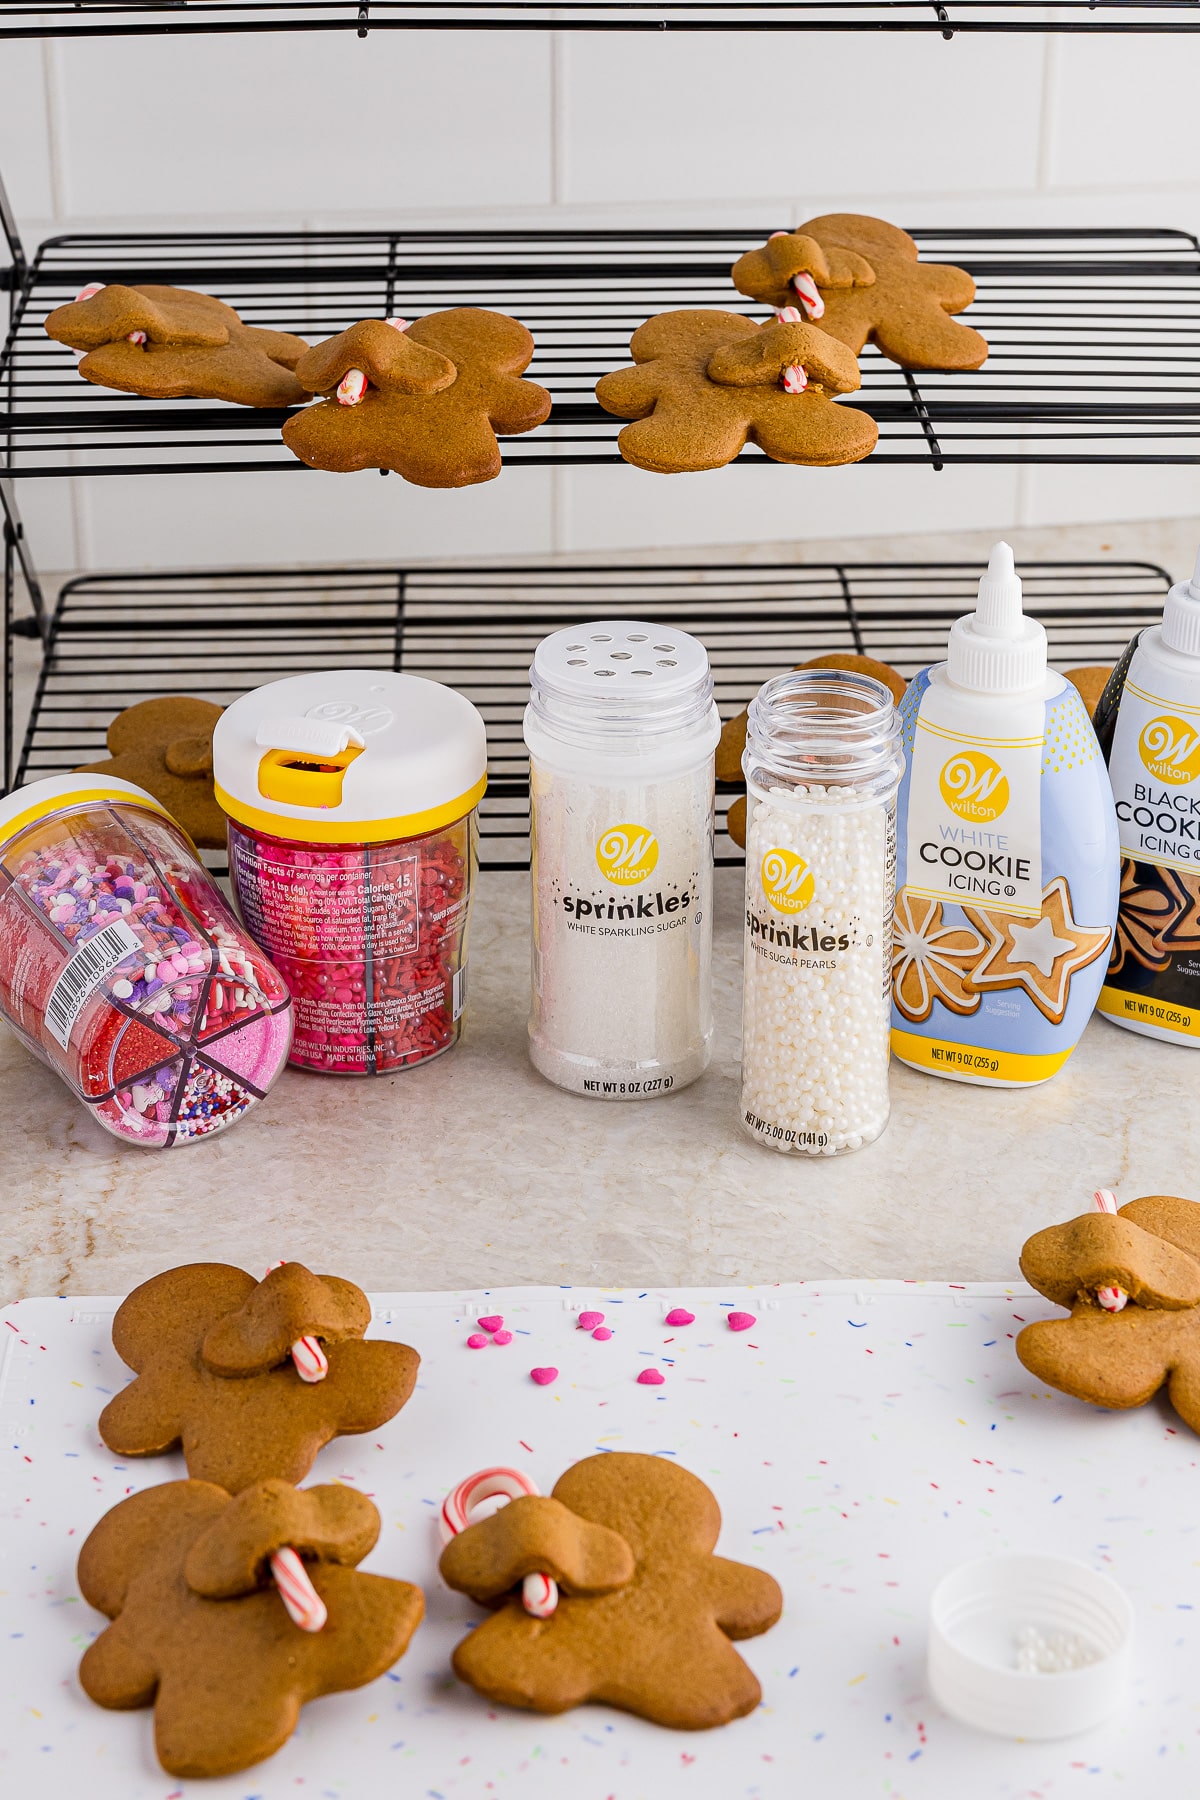 witlon sprinkles and cookie icing on a white countertop with a tri fold cookie sheet and undecorated gingerbread men